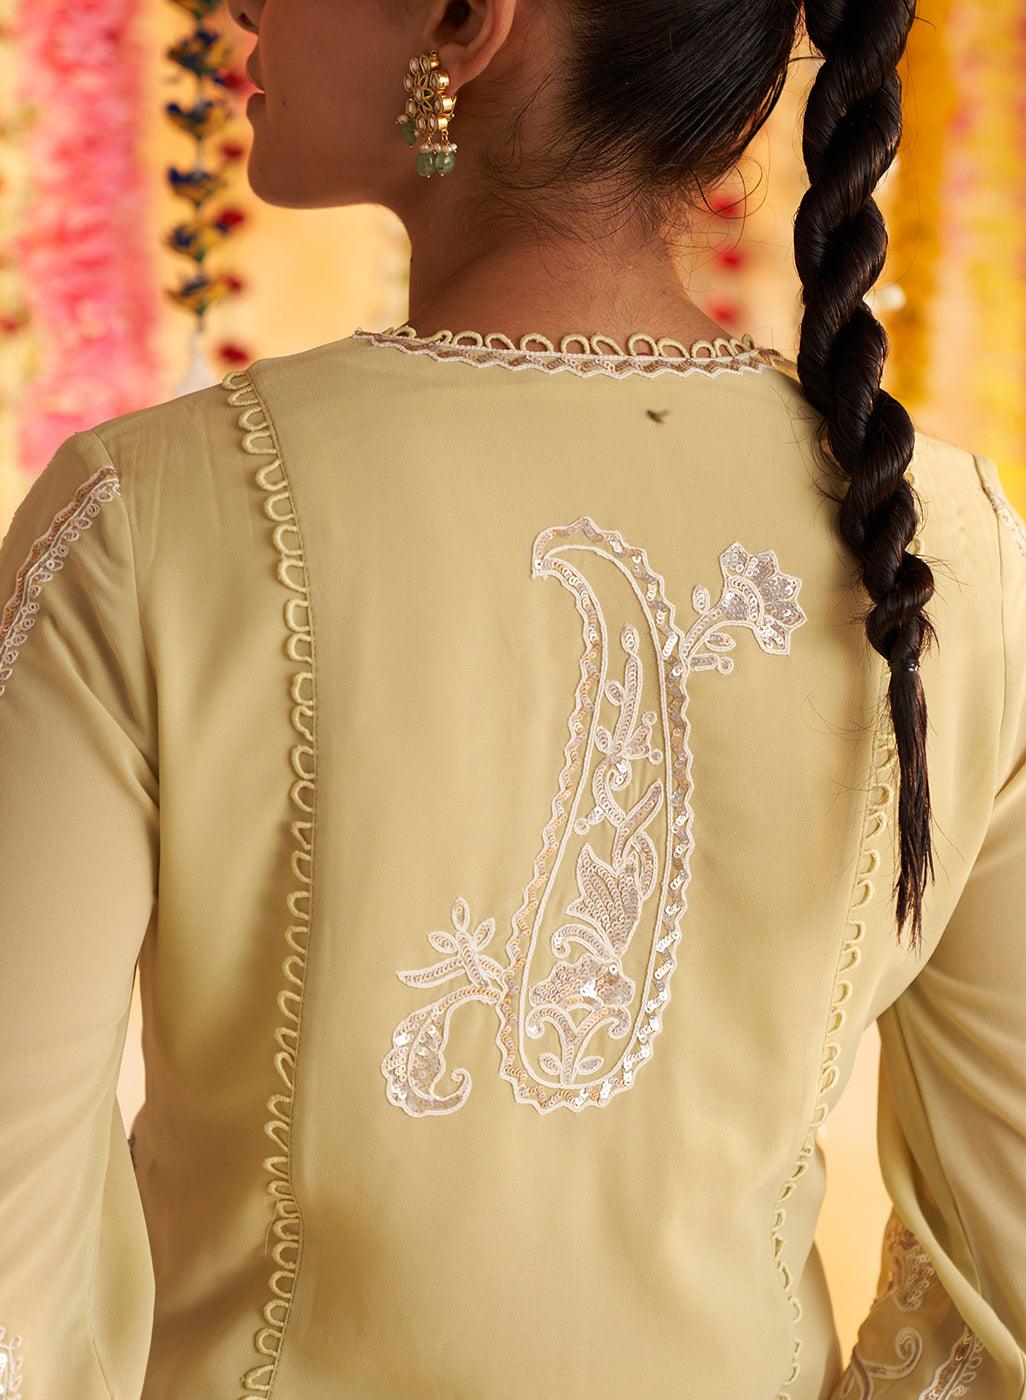 Apple Green Kurta With Delicate Embroidery With Scattered Mirror Designs